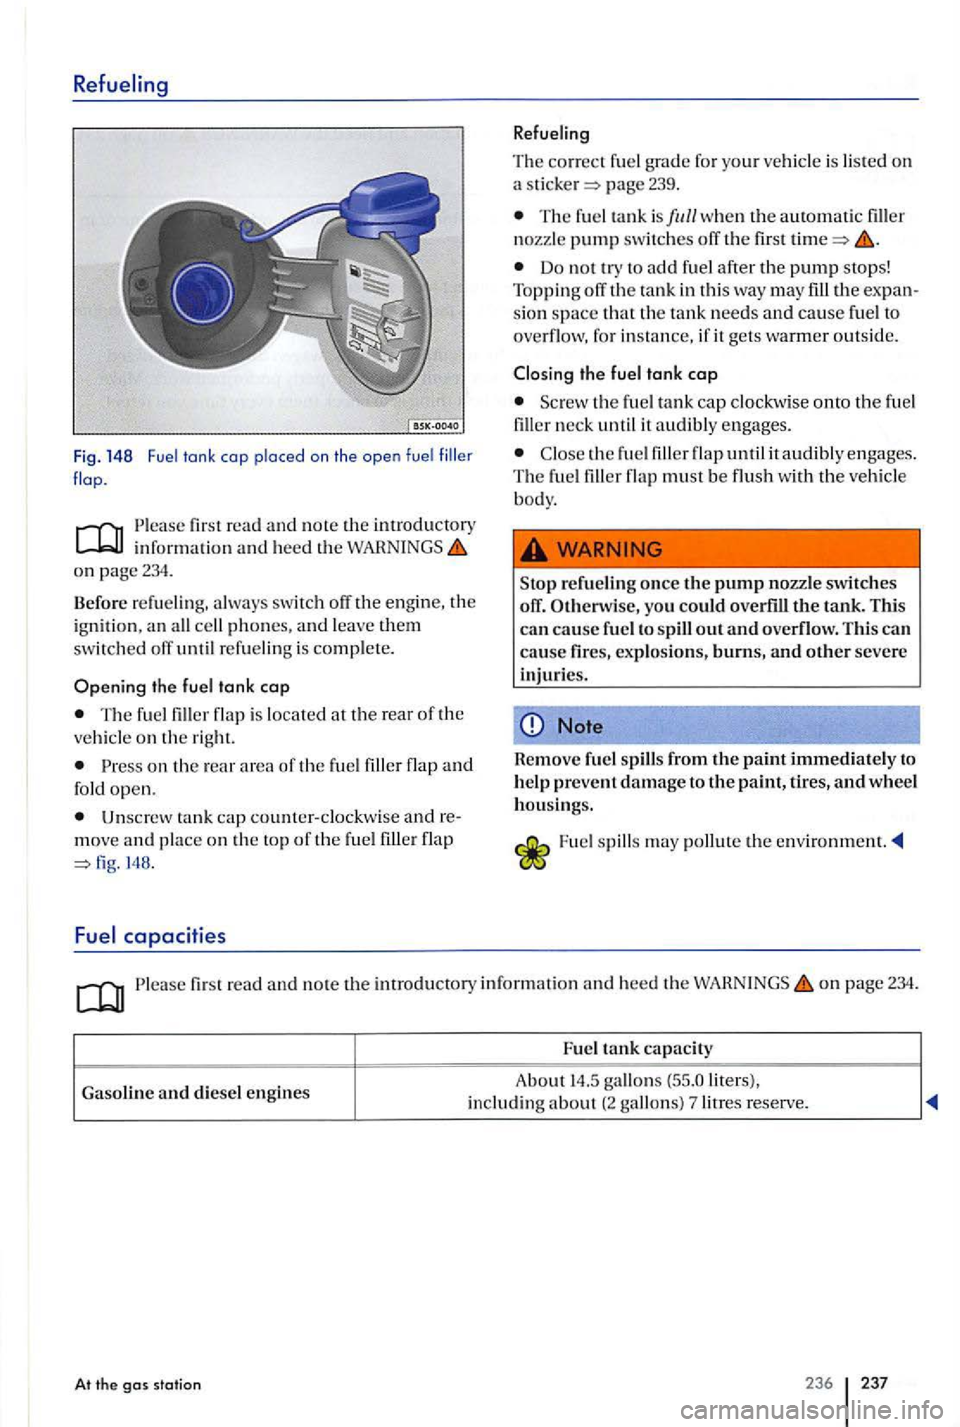 VOLKSWAGEN GOLF PLUS 2004  Owners Manual Fig. 148 Fuel tank  cap  placed on the ope n fue l 
Please  first read and note the  introductory information and heed th e on page 234. 
Before  refueling, always  switch  off the eng in e, the 
i gn